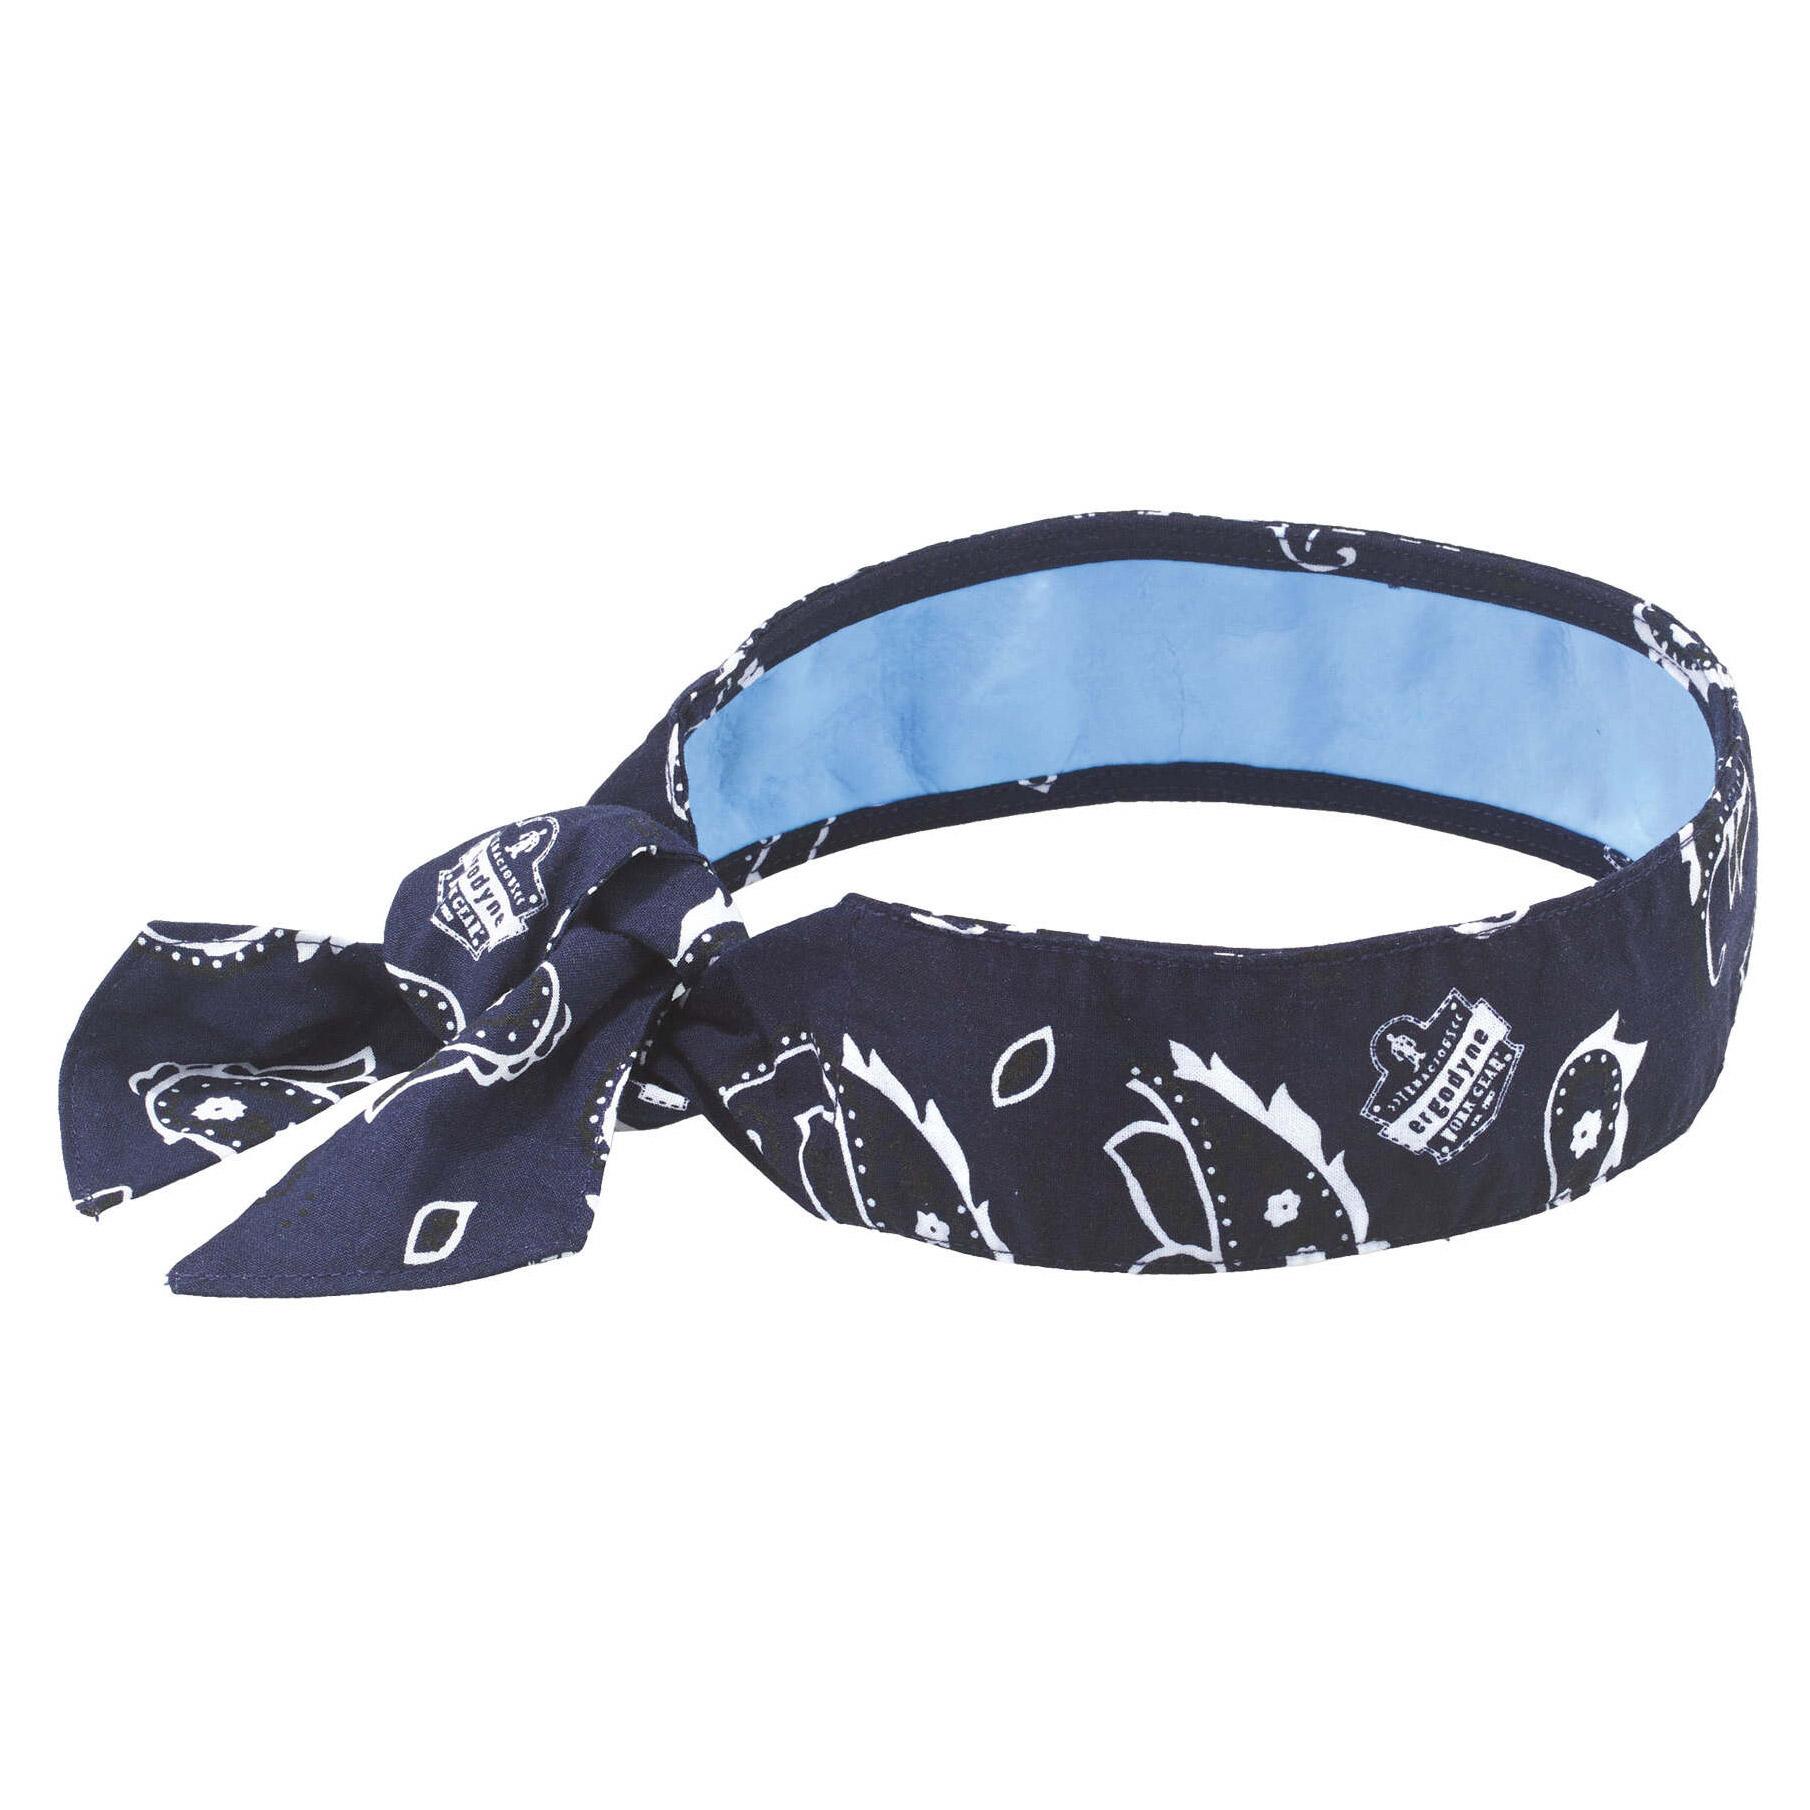 6 PACK MIRACOOL CHILL ITS COOLING BANDANA HEAT STRESS PREVENTION 940B NAVY 